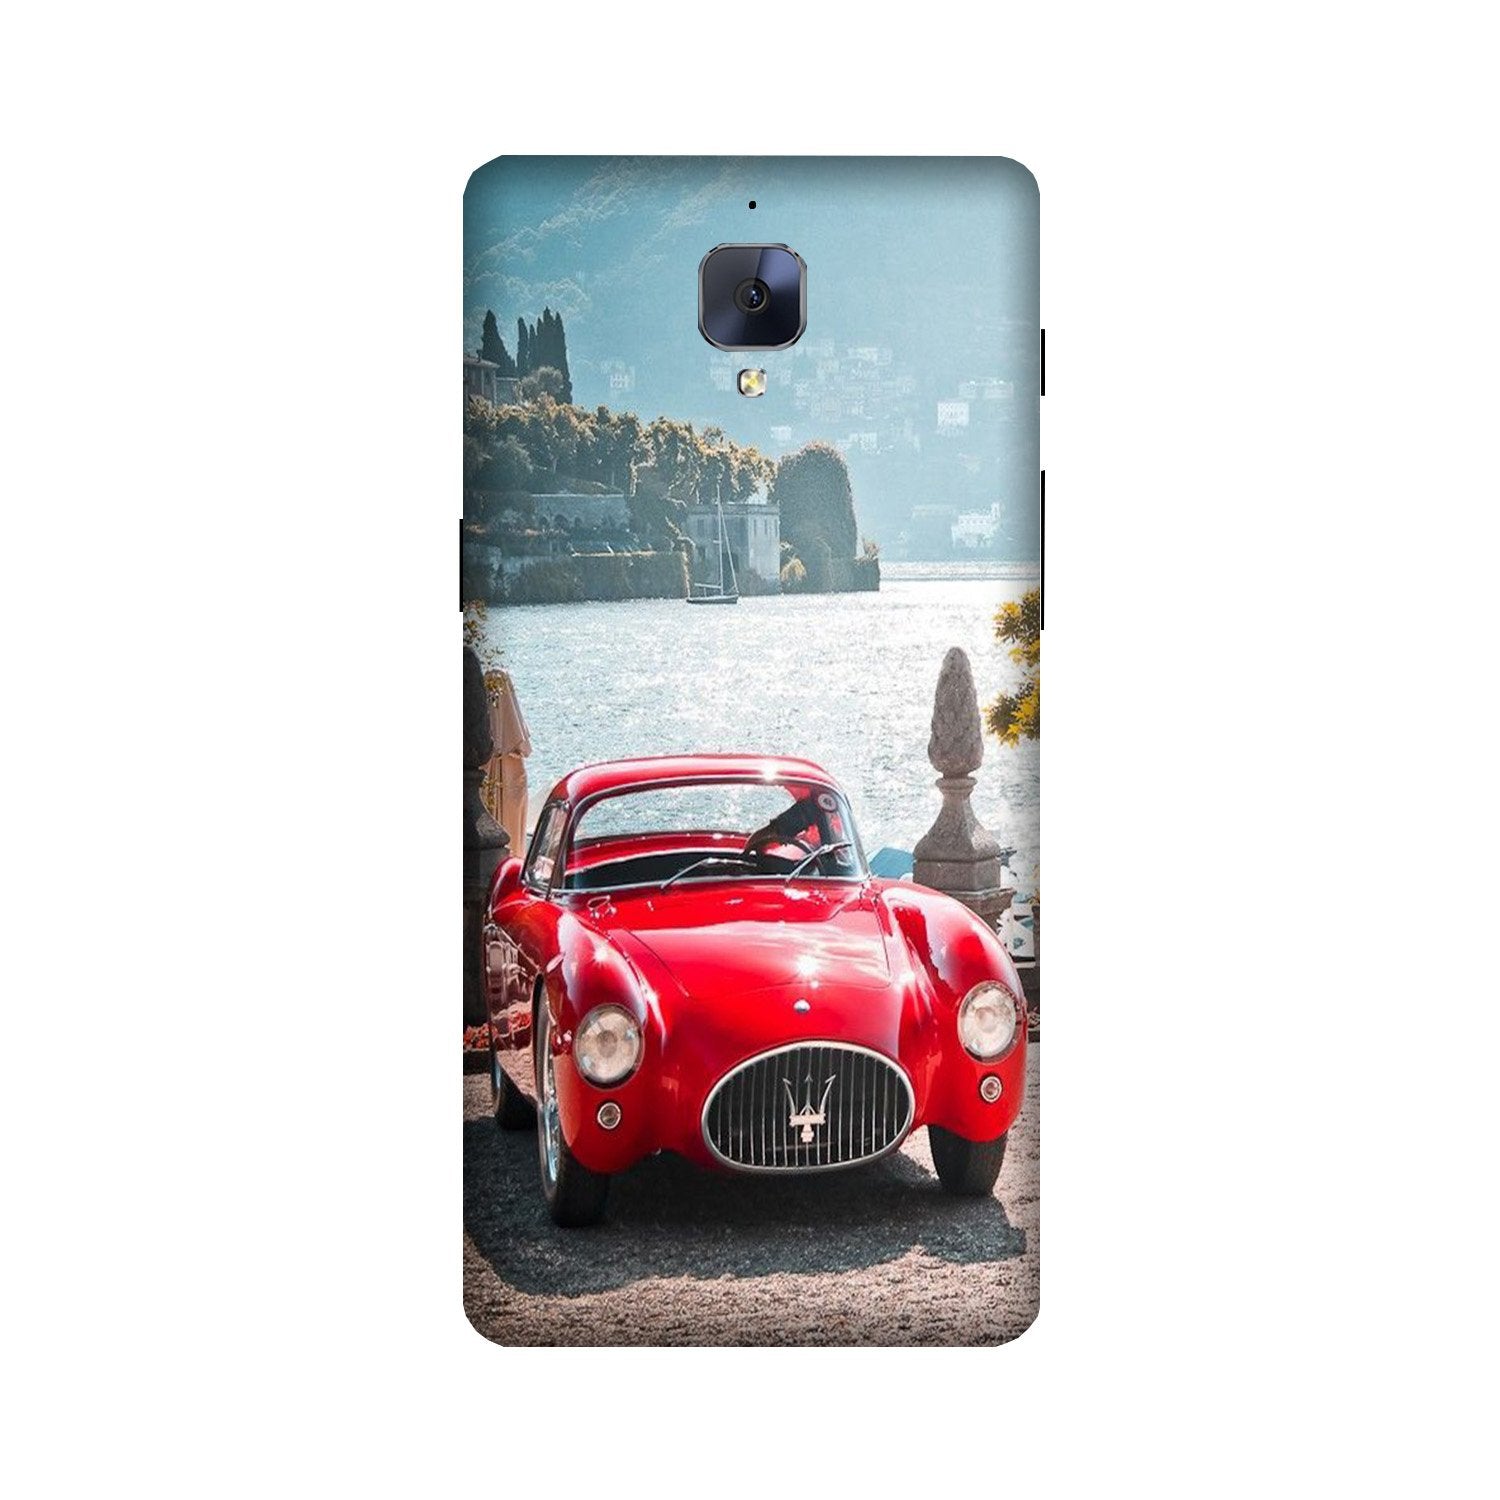 Vintage Car Case for OnePlus 3/ 3T